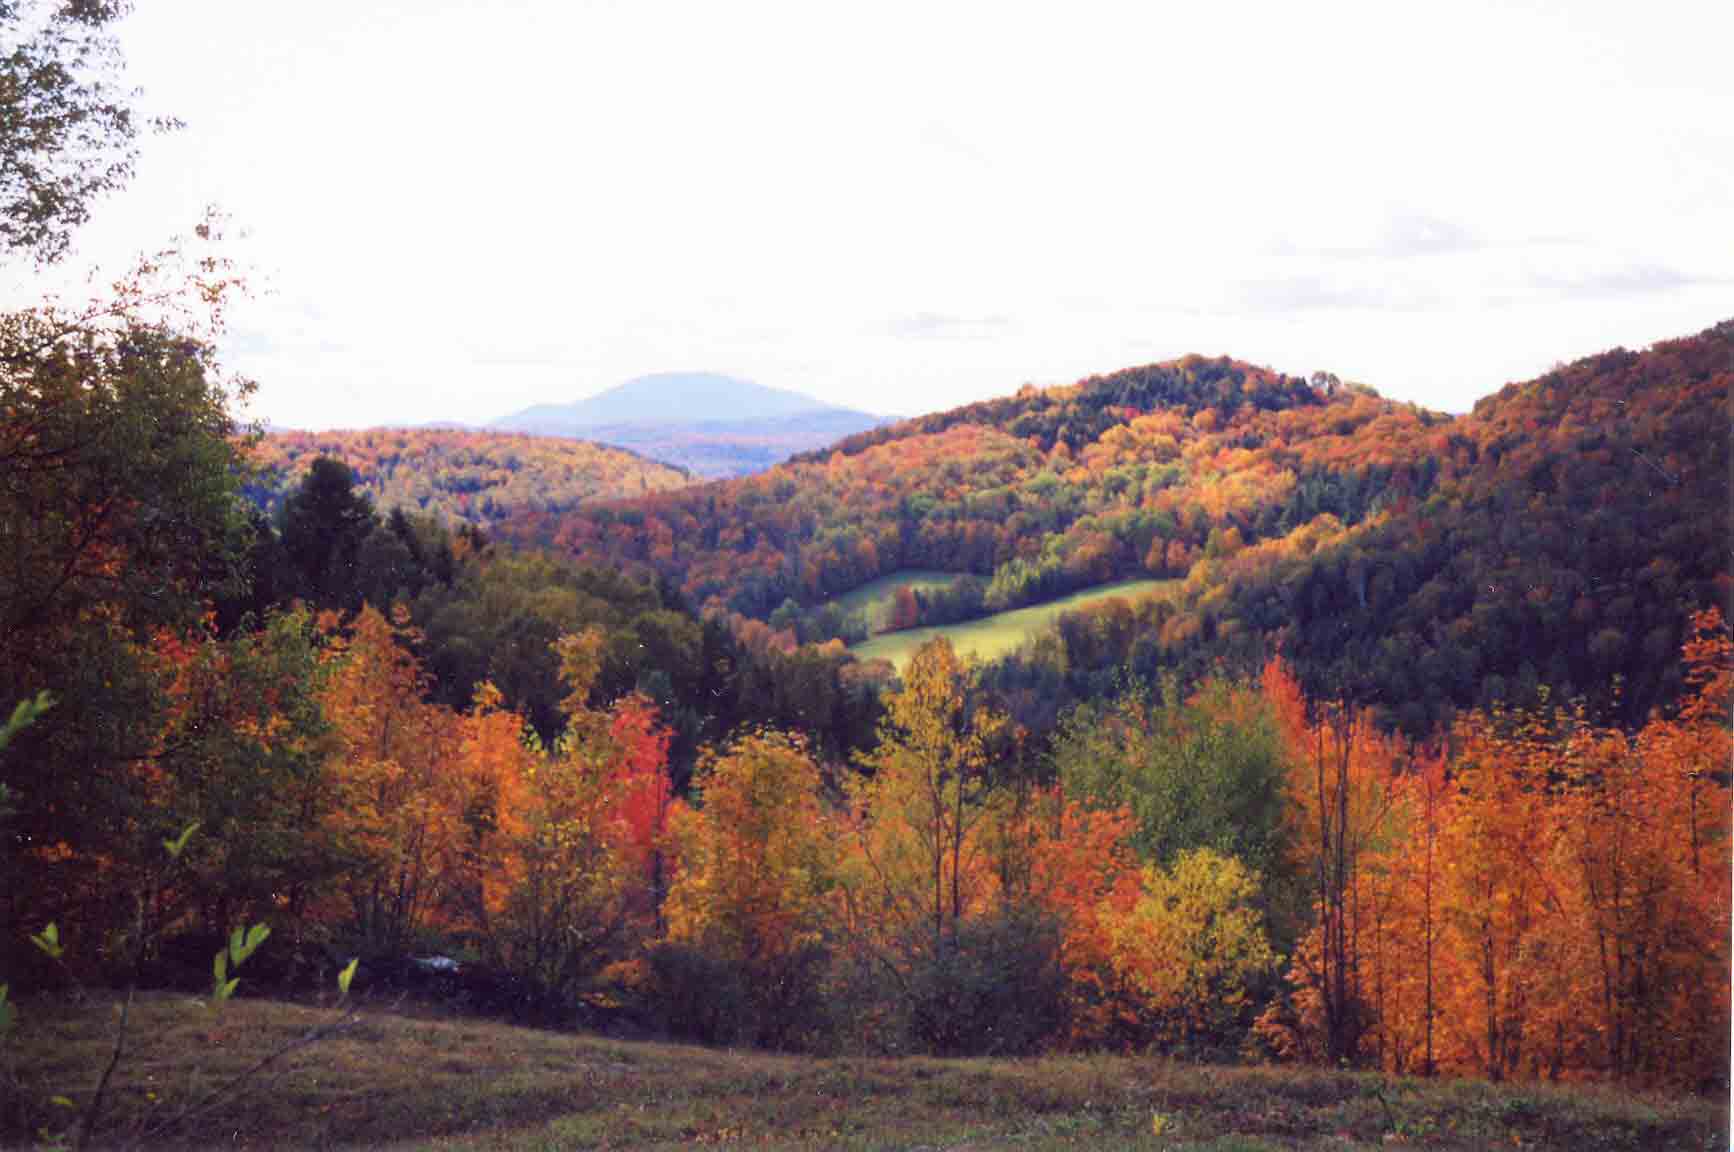 mm 1.2 - Fall view from AT west (trail south) of VT 12. Mountain in distance is Mt. Ascutney.  Courtesy dlcul@conncoll.edu